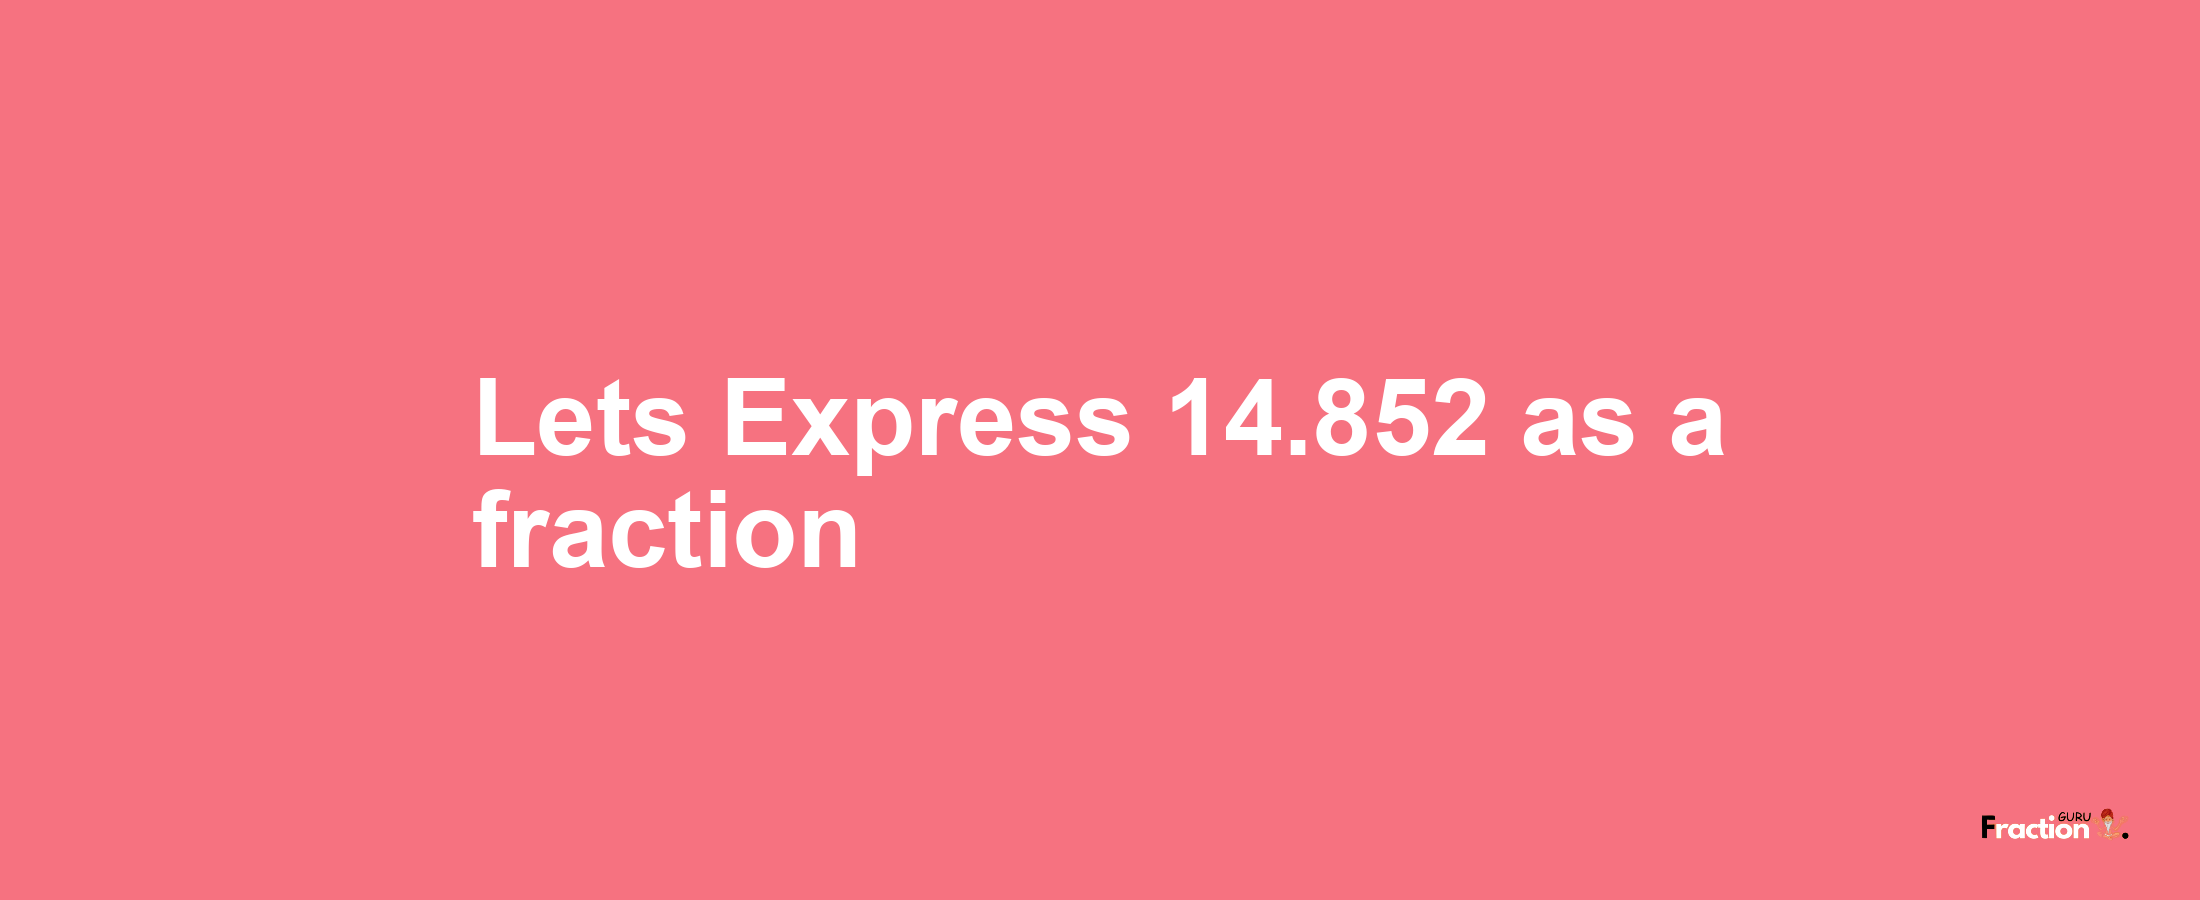 Lets Express 14.852 as afraction